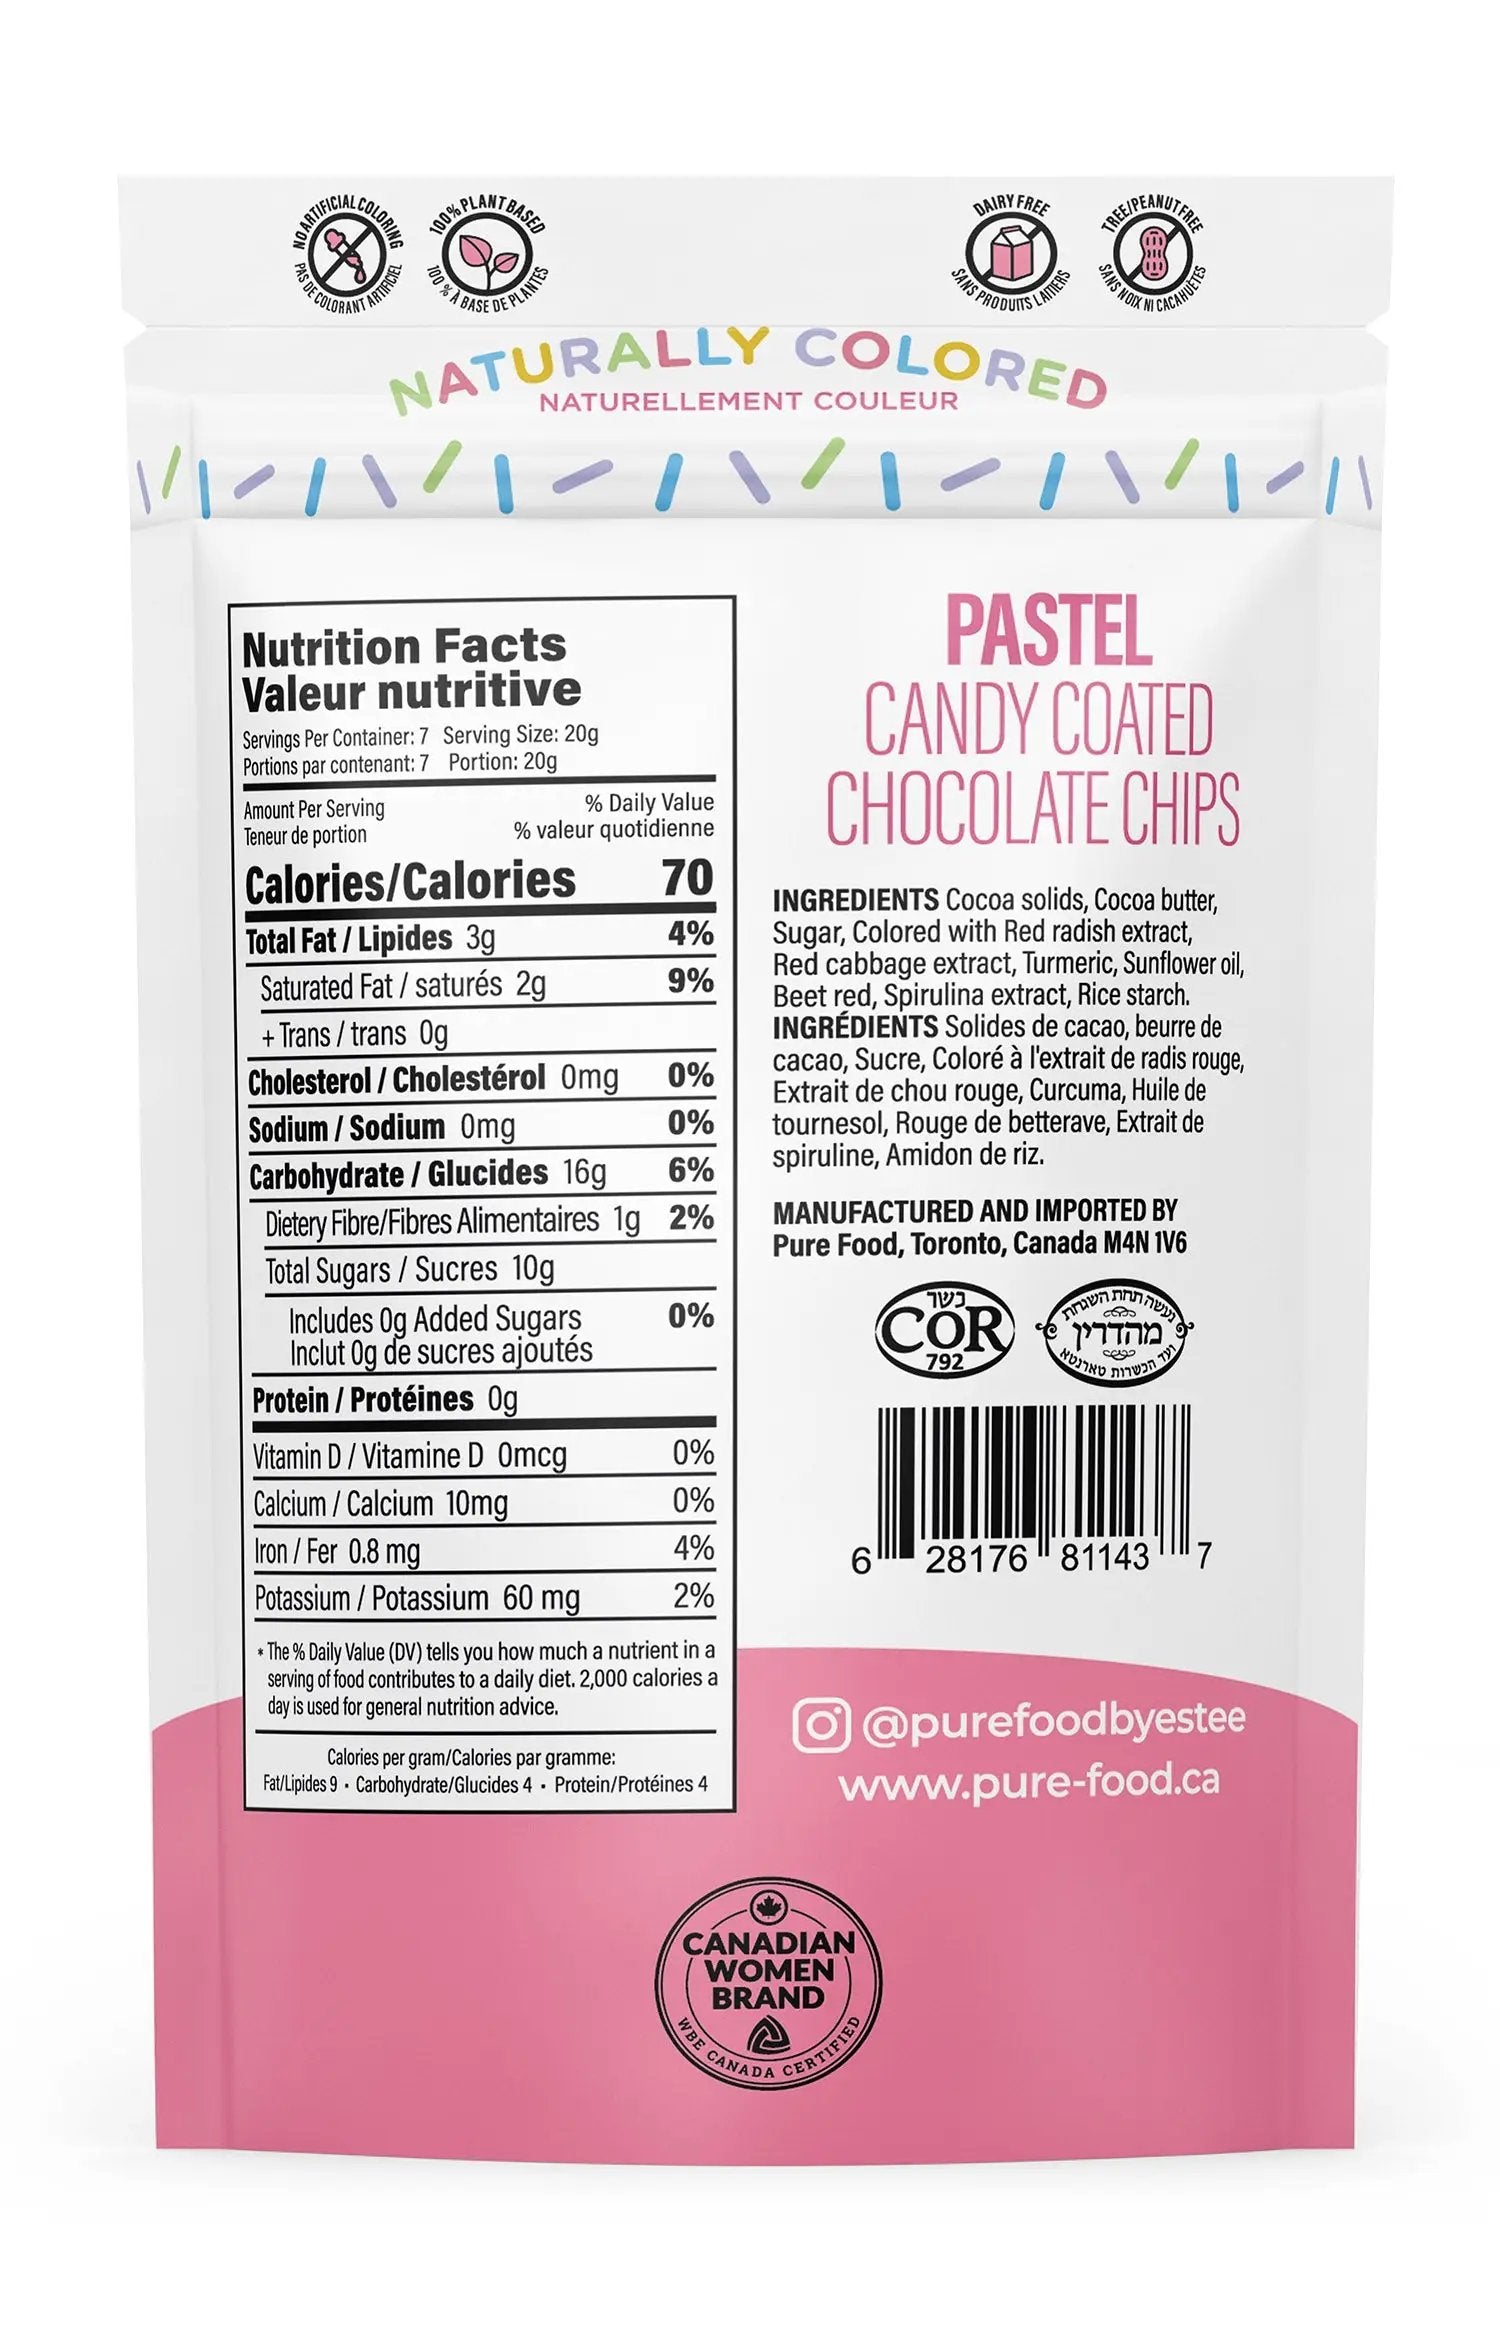 Pastel All Natural Candy Coated Mini Chocolate Chips - 5 OZ -  3 Pack